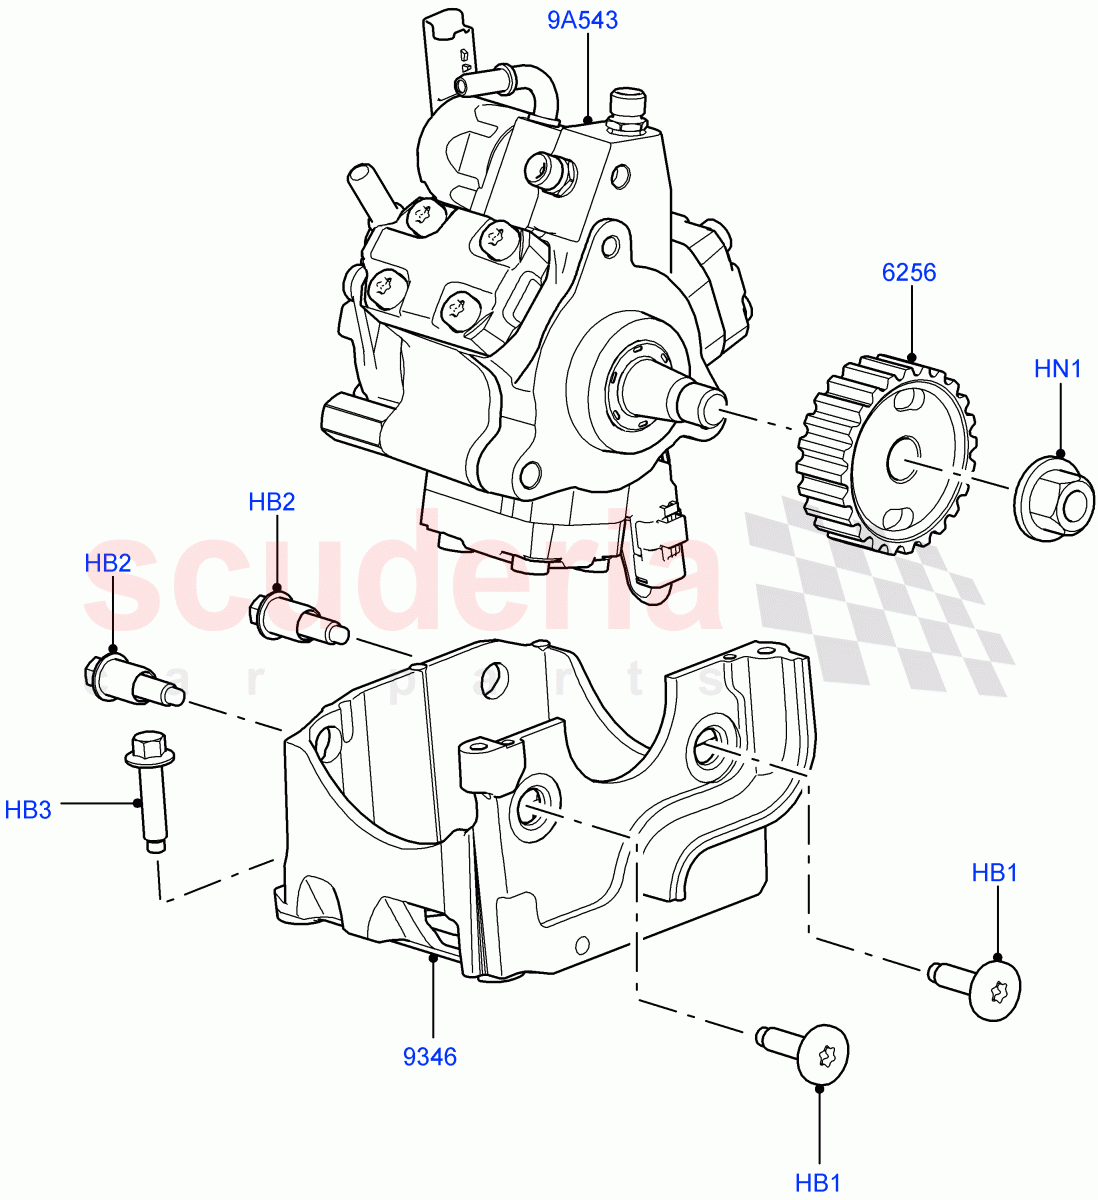 Fuel Injection Pump - Diesel(Lion Diesel 2.7 V6 (140KW))((V)FROMAA000001) of Land Rover Land Rover Discovery 4 (2010-2016) [2.7 Diesel V6]